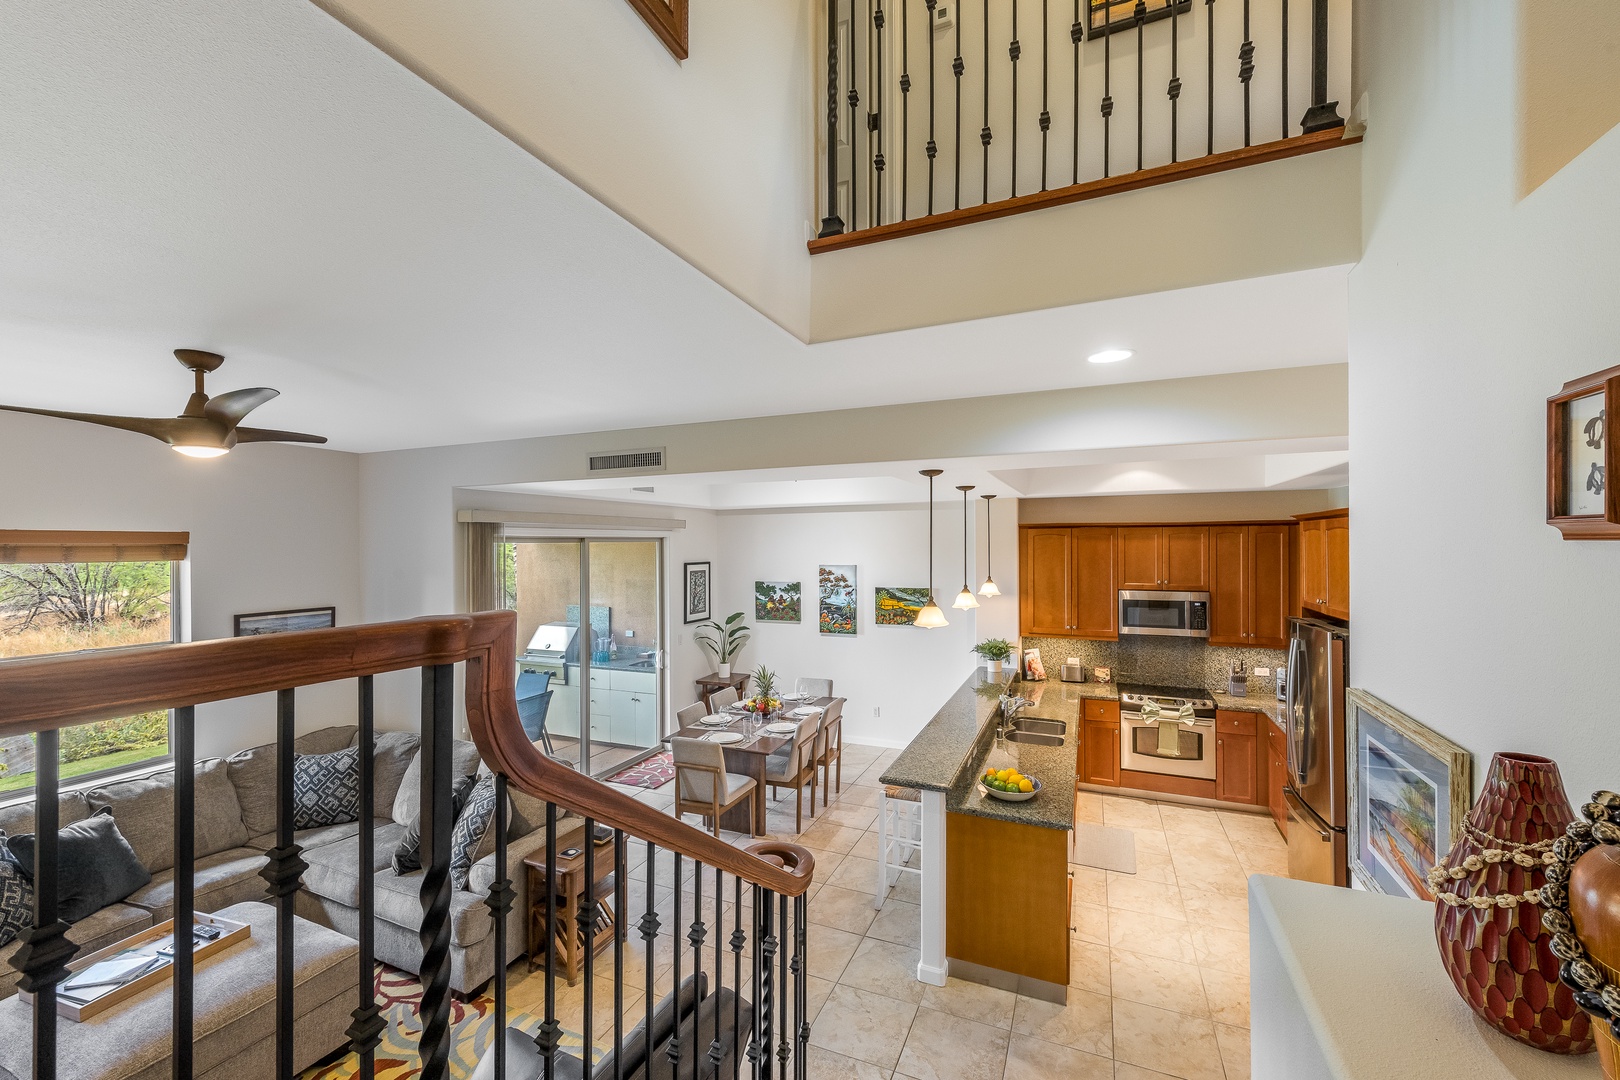 Kamuela Vacation Rentals, Mauna Lani Fairways #603 - Lofted staircase adds elegance and natural light